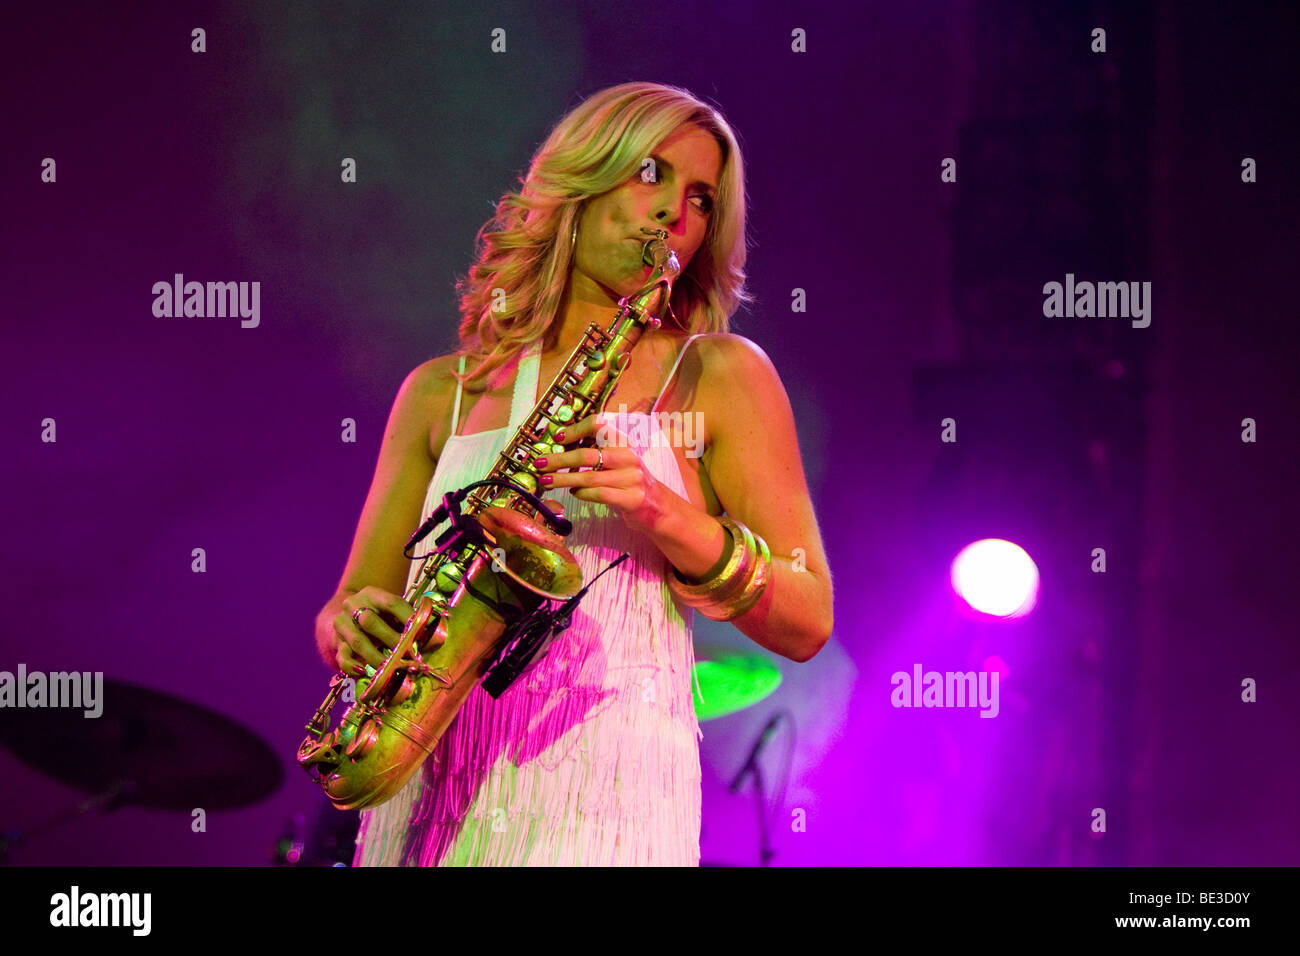 The Dutch saxophon player Candy Dulfer Live at the Blue Balls Festival in the Luzernersaal hall of the KKL in Lucerne, Switzerl Stock Photo